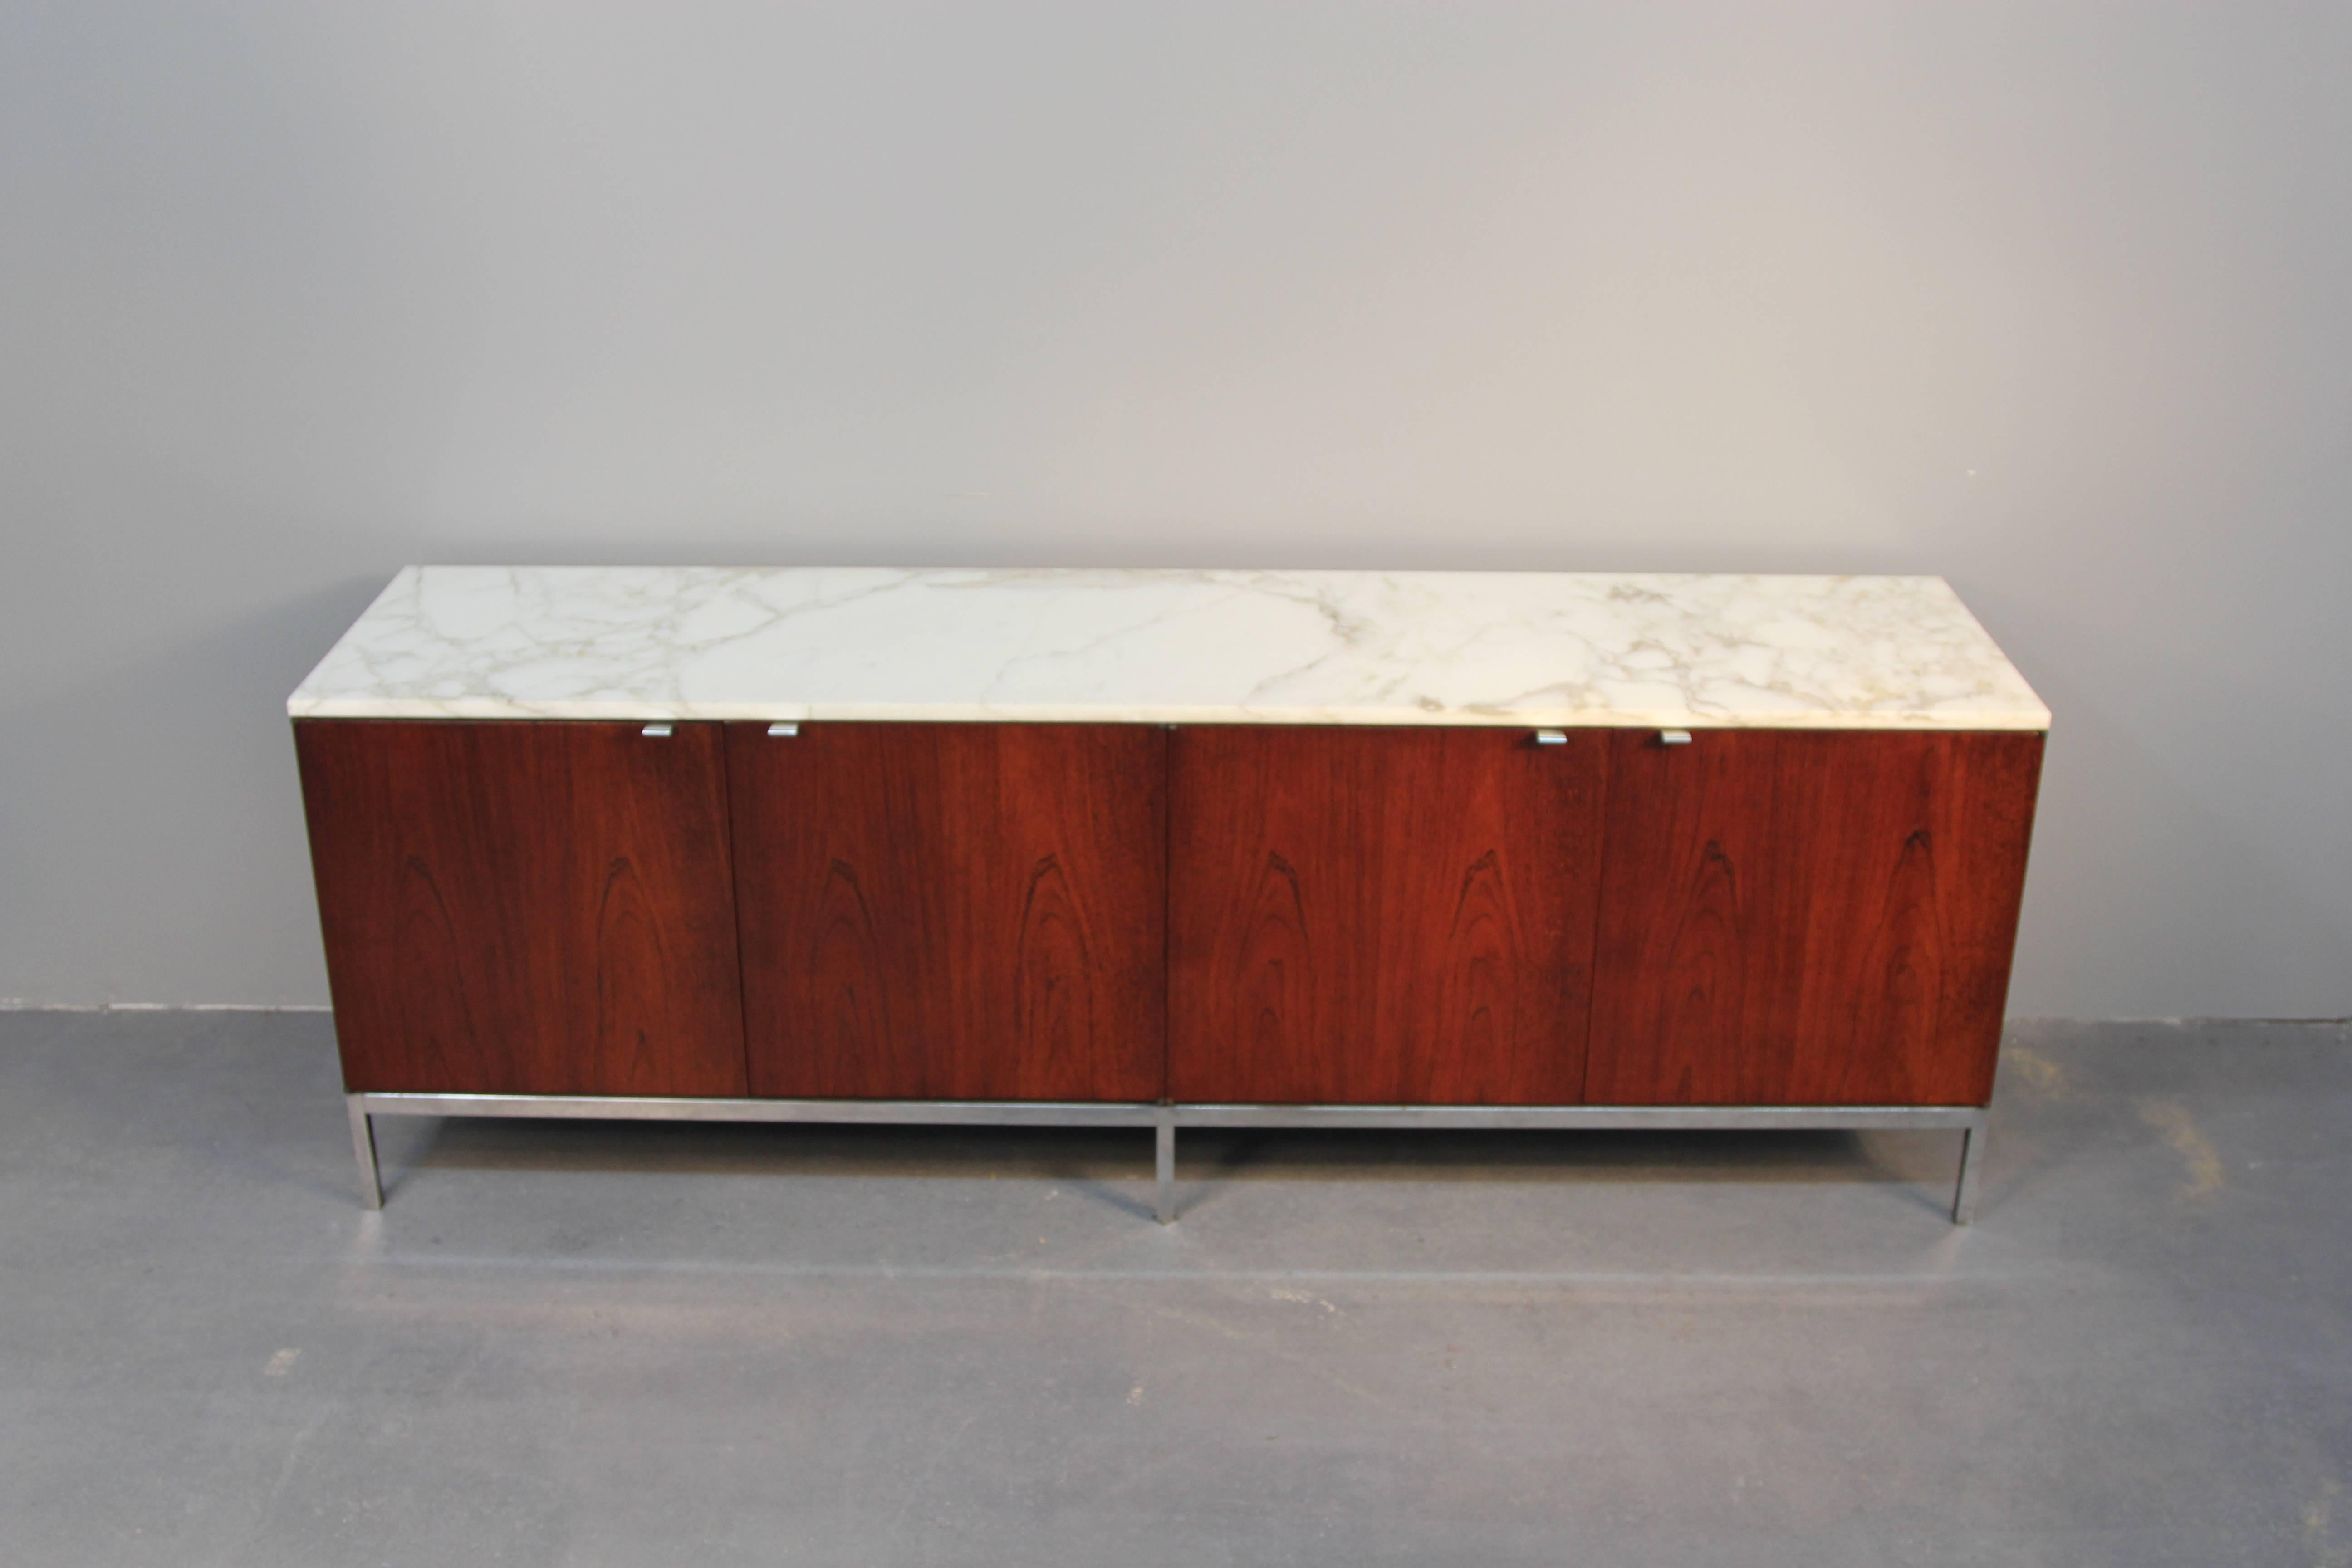 Amazing Carrara marble-top Florence Knoll credenza. Rosewood cabinet with two sets of doors, chrome hardware and base. Two pullout silverware drawers, dividers and pull-out platform on right side. Makes a great sideboard, cabinet, or entertainment